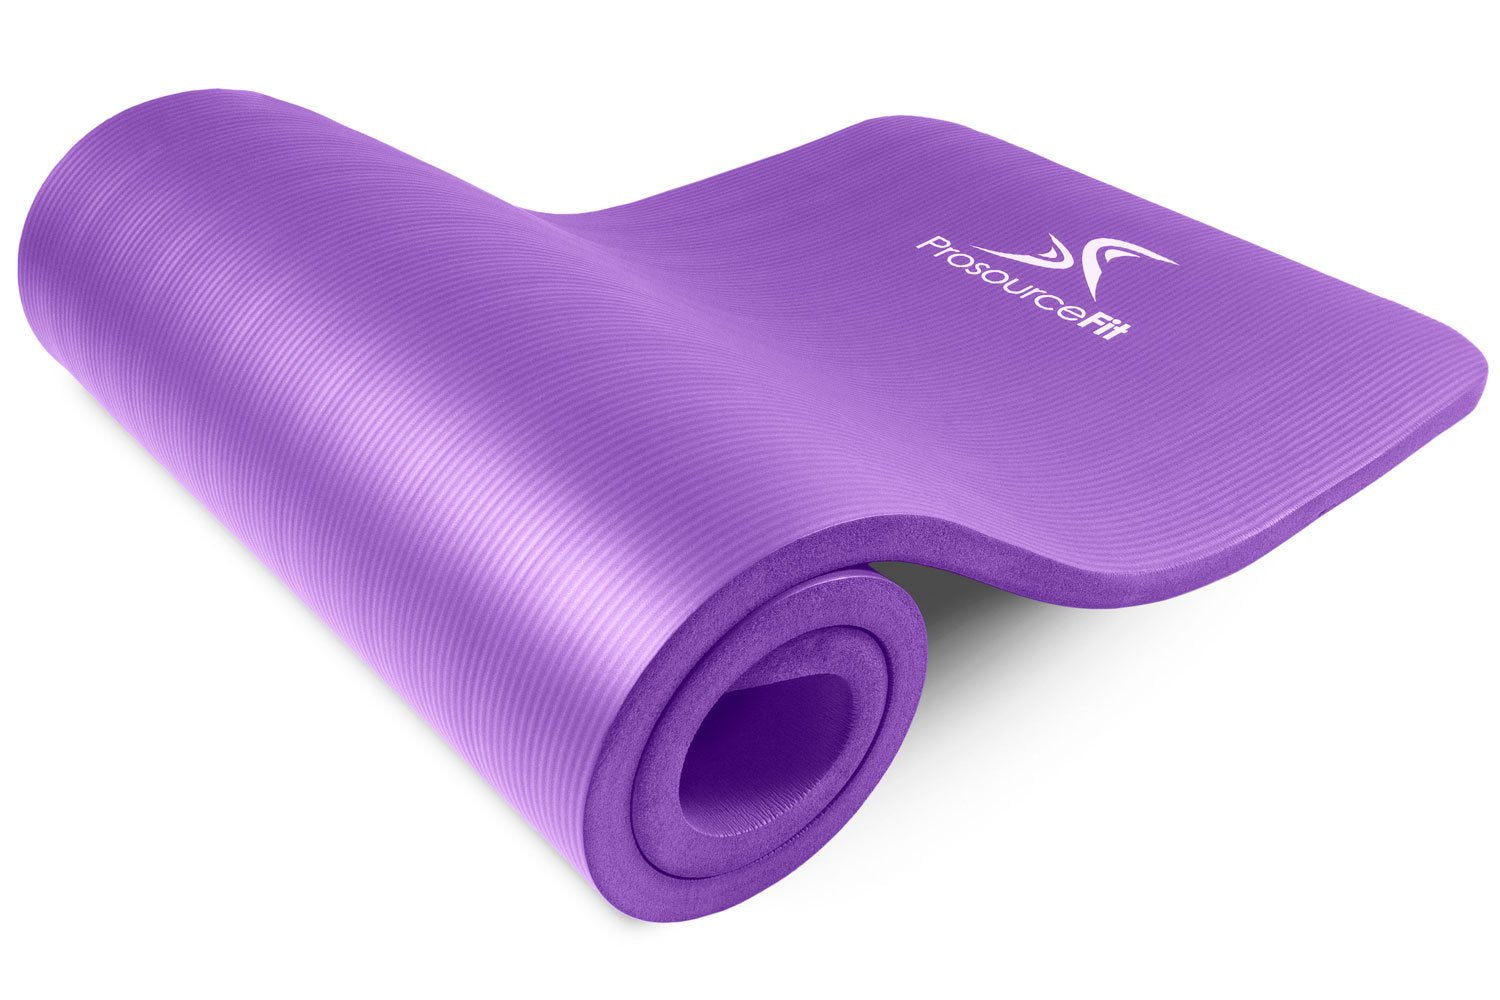 Extra Thick Yoga and Pilates Mat 1 inch Extra Thick Yoga and Pilates Mat 1 inch